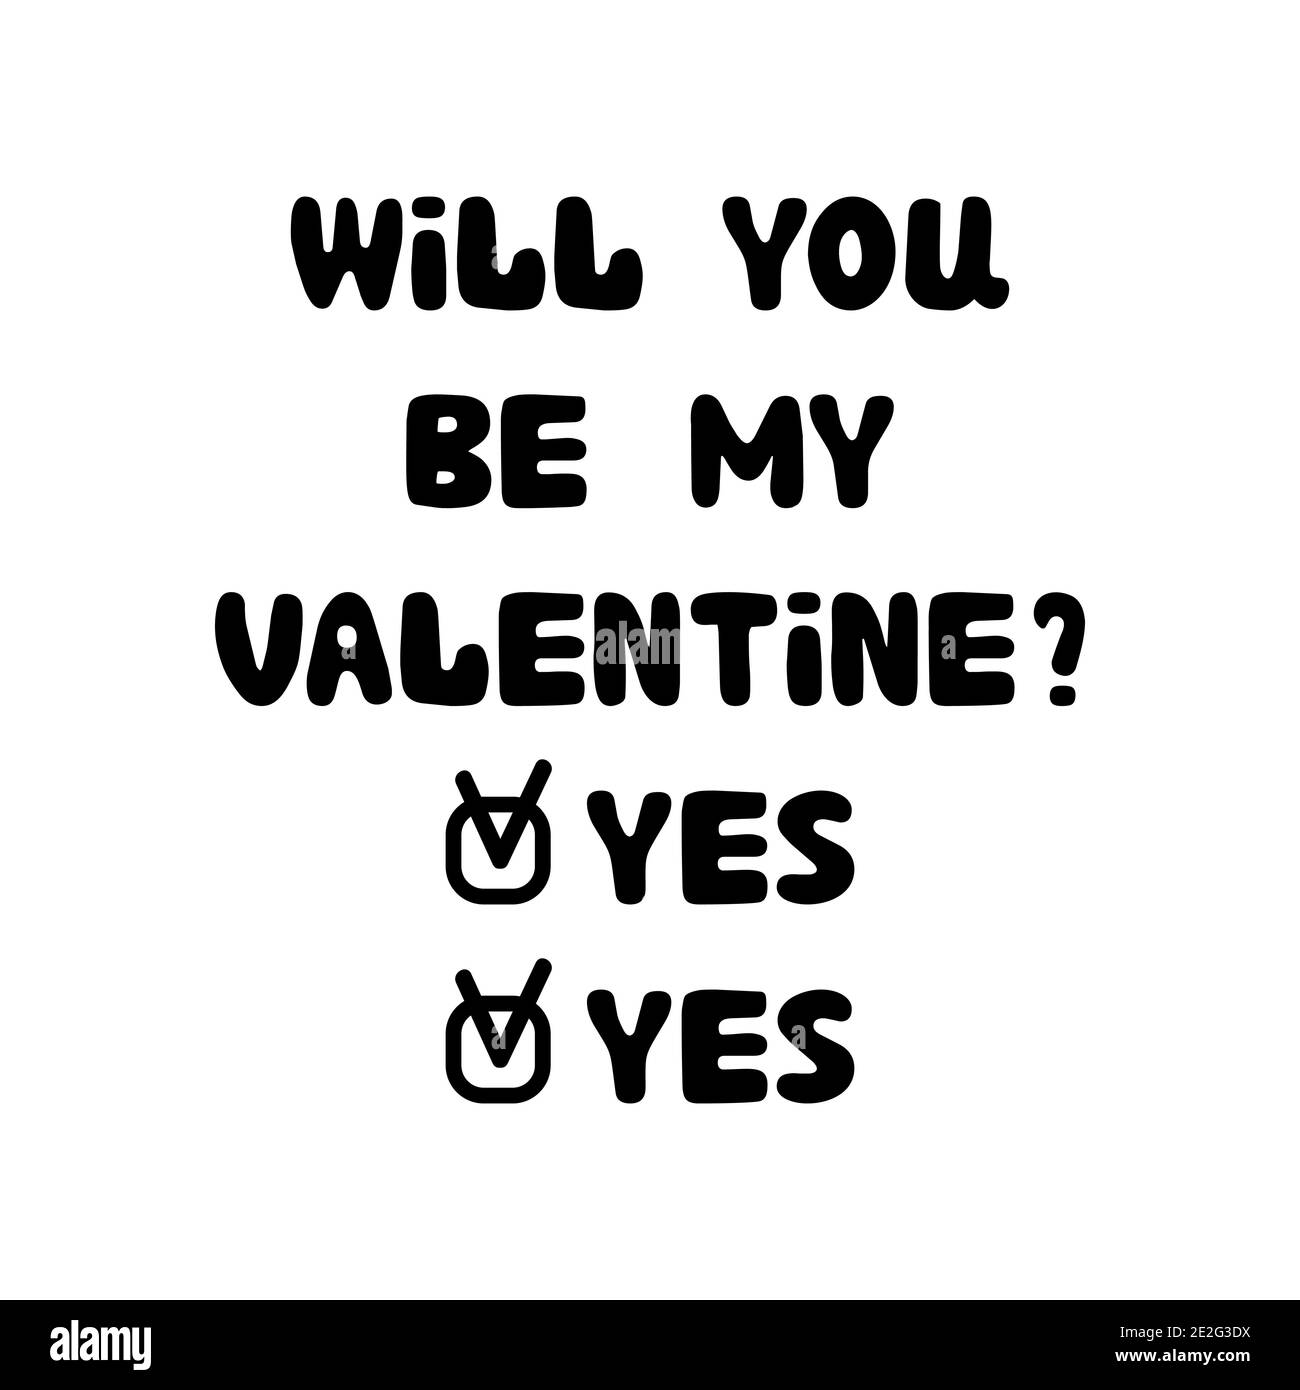 WIll You Be My GirlFriend Circle Yes or No: WIll You Be My GirlFriend  Circle Yes or No Blank Lined Valentine's Diary